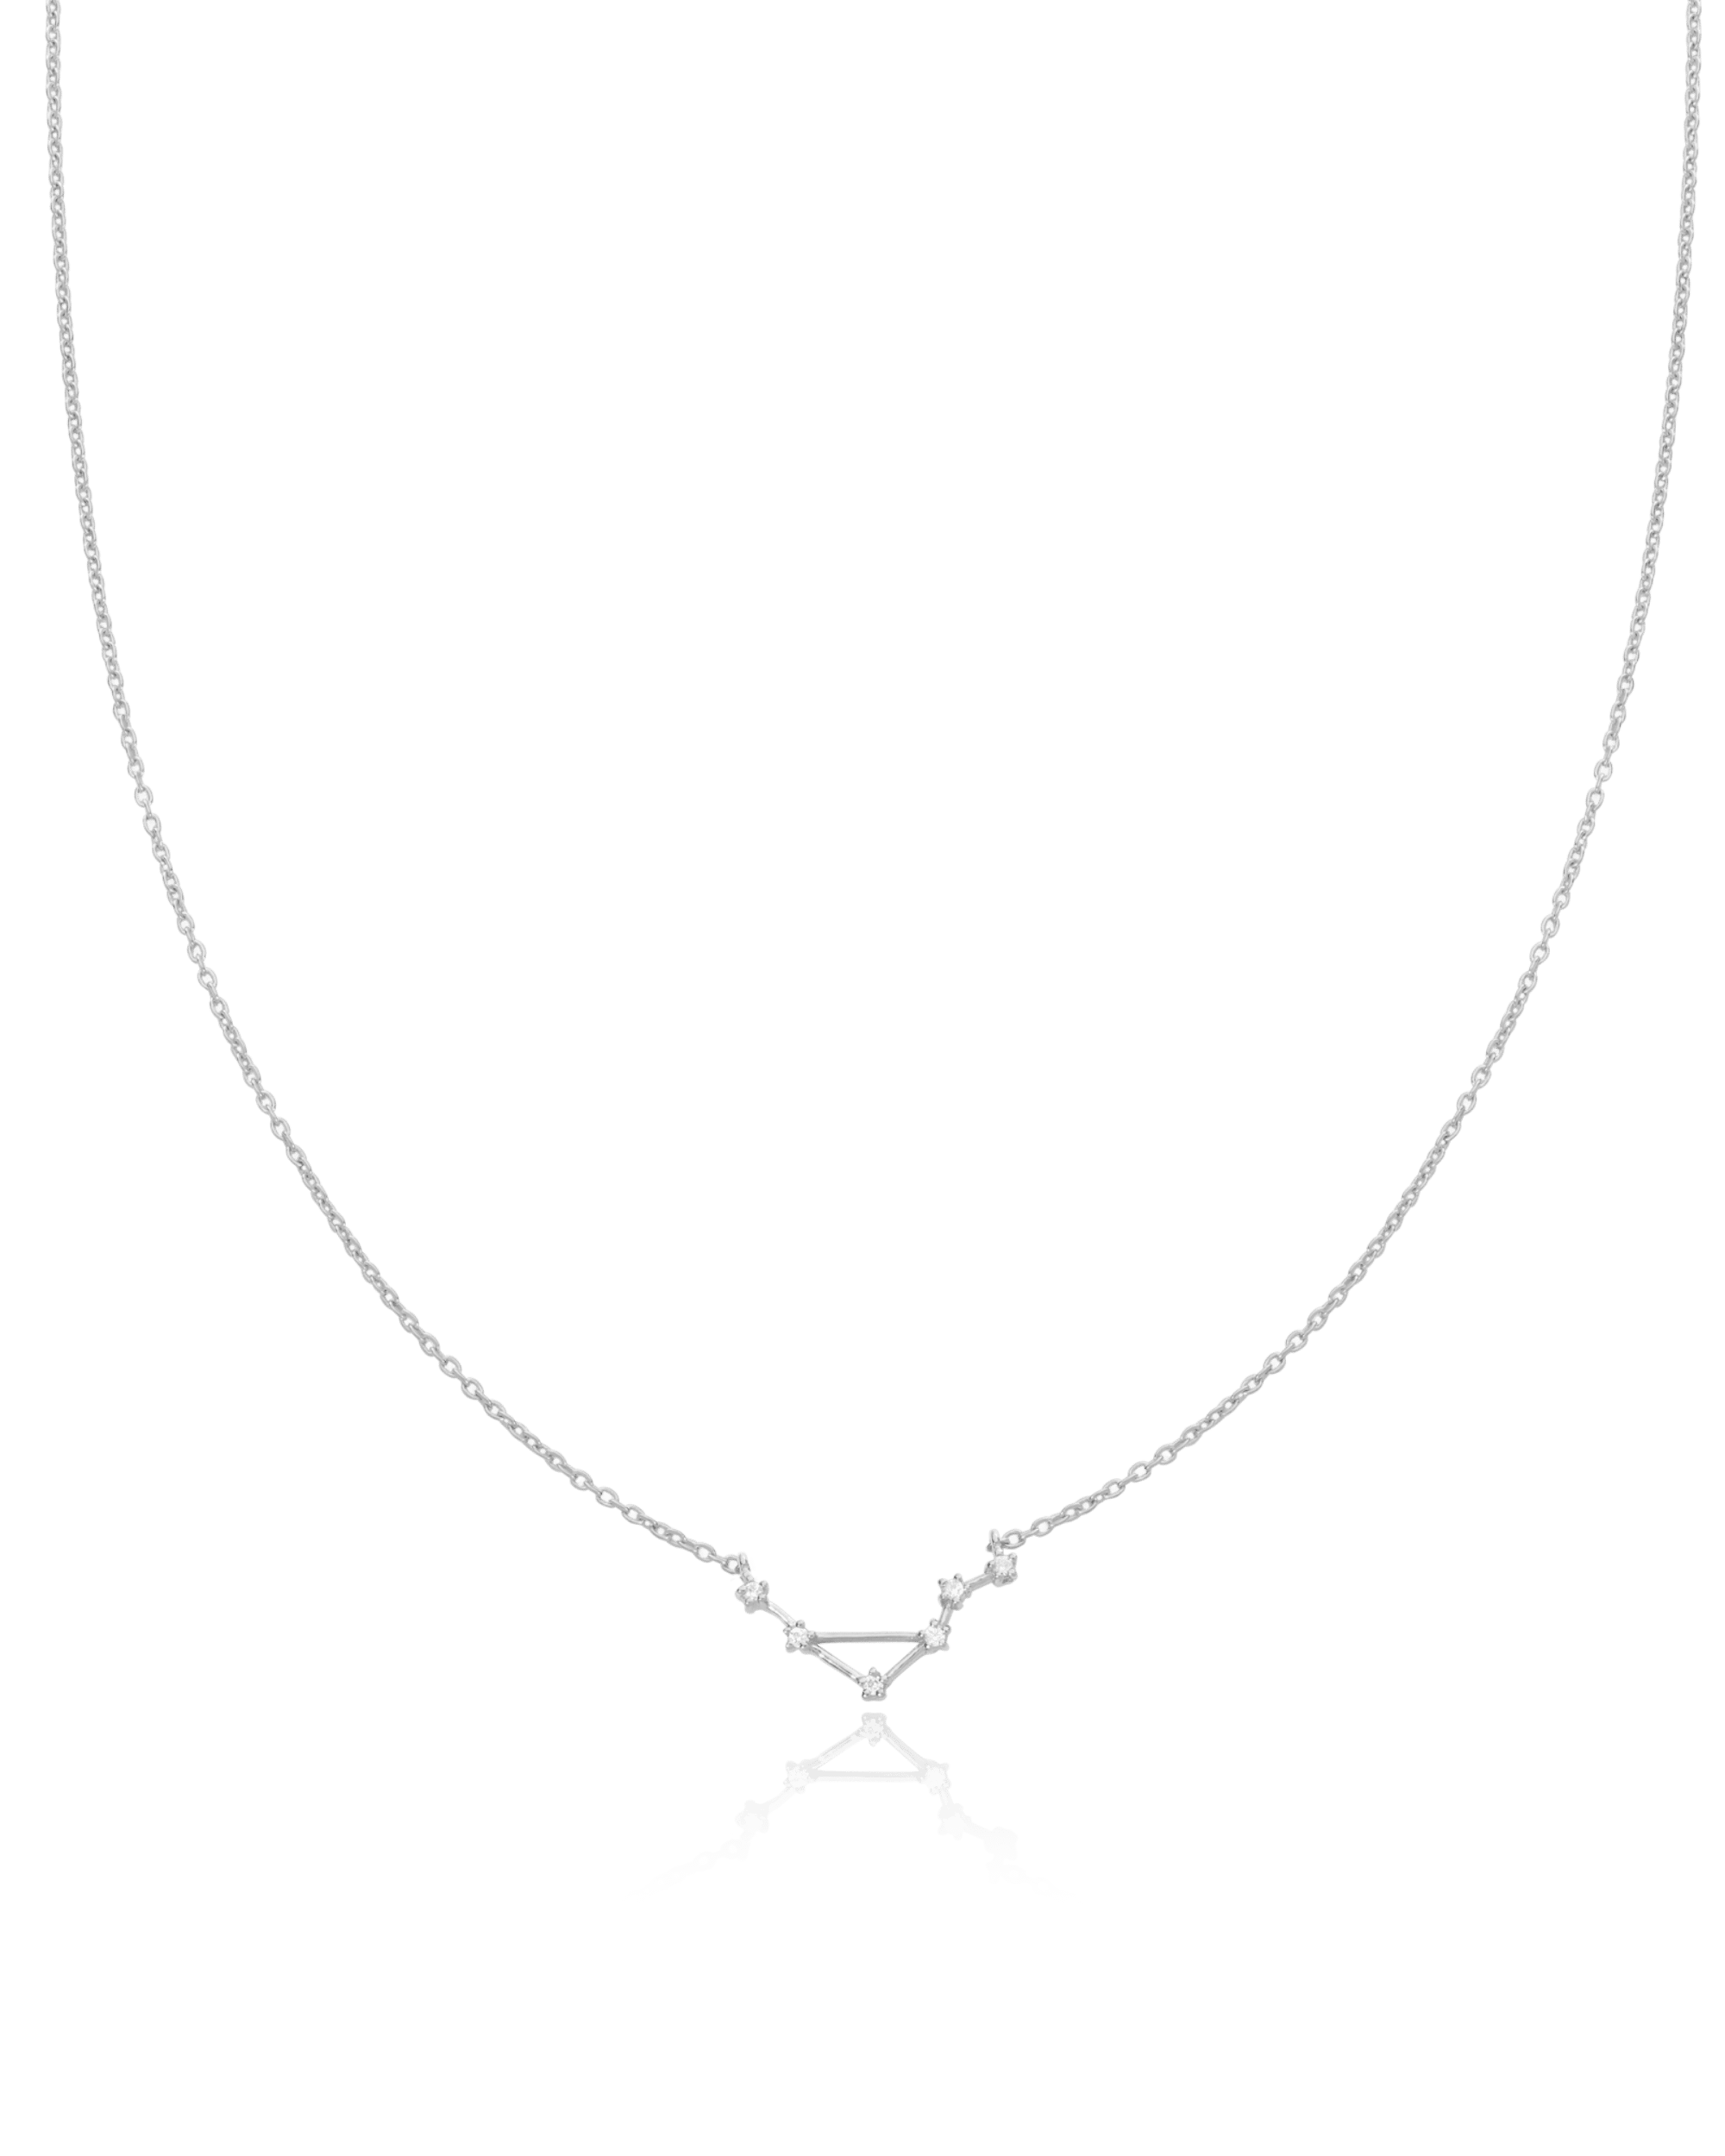 Single Constellation Necklace with Diamonds - 18K Gold Vermeil Necklaces magal-dev 